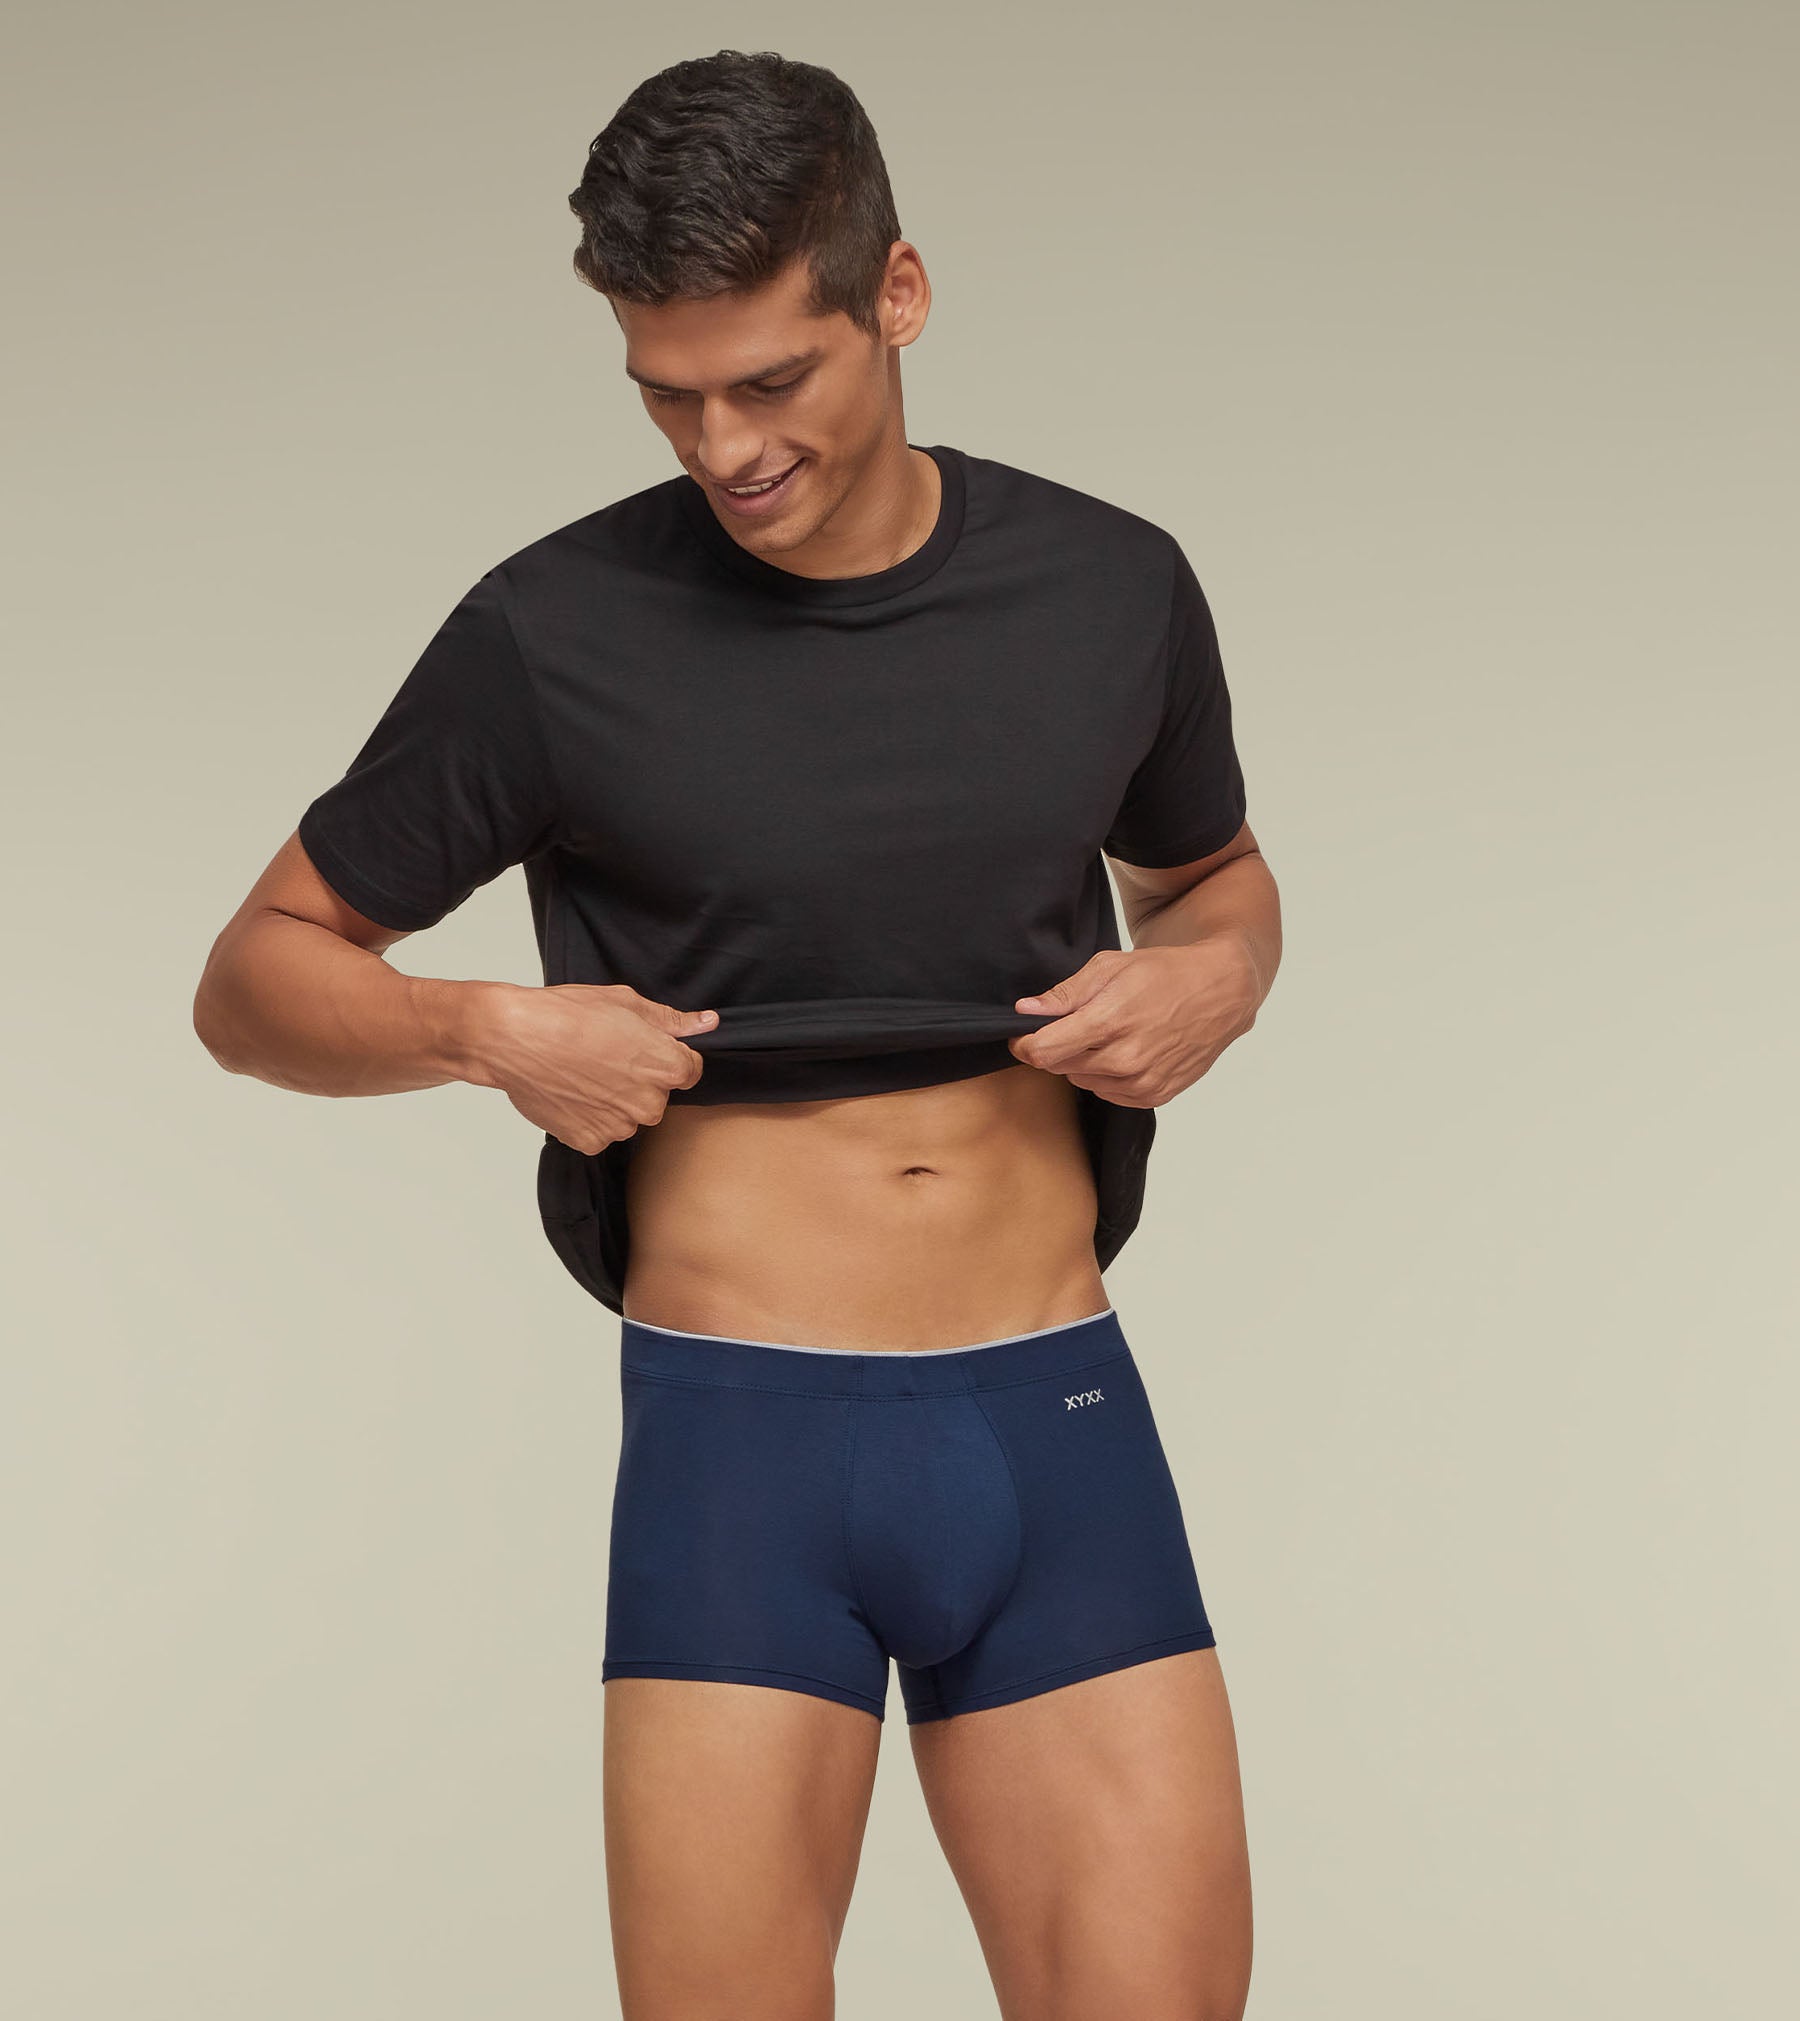 Uno Modal Trunks For Men Pack of 3 (Black, Blue, Grey) -  XYXX Mens Apparels